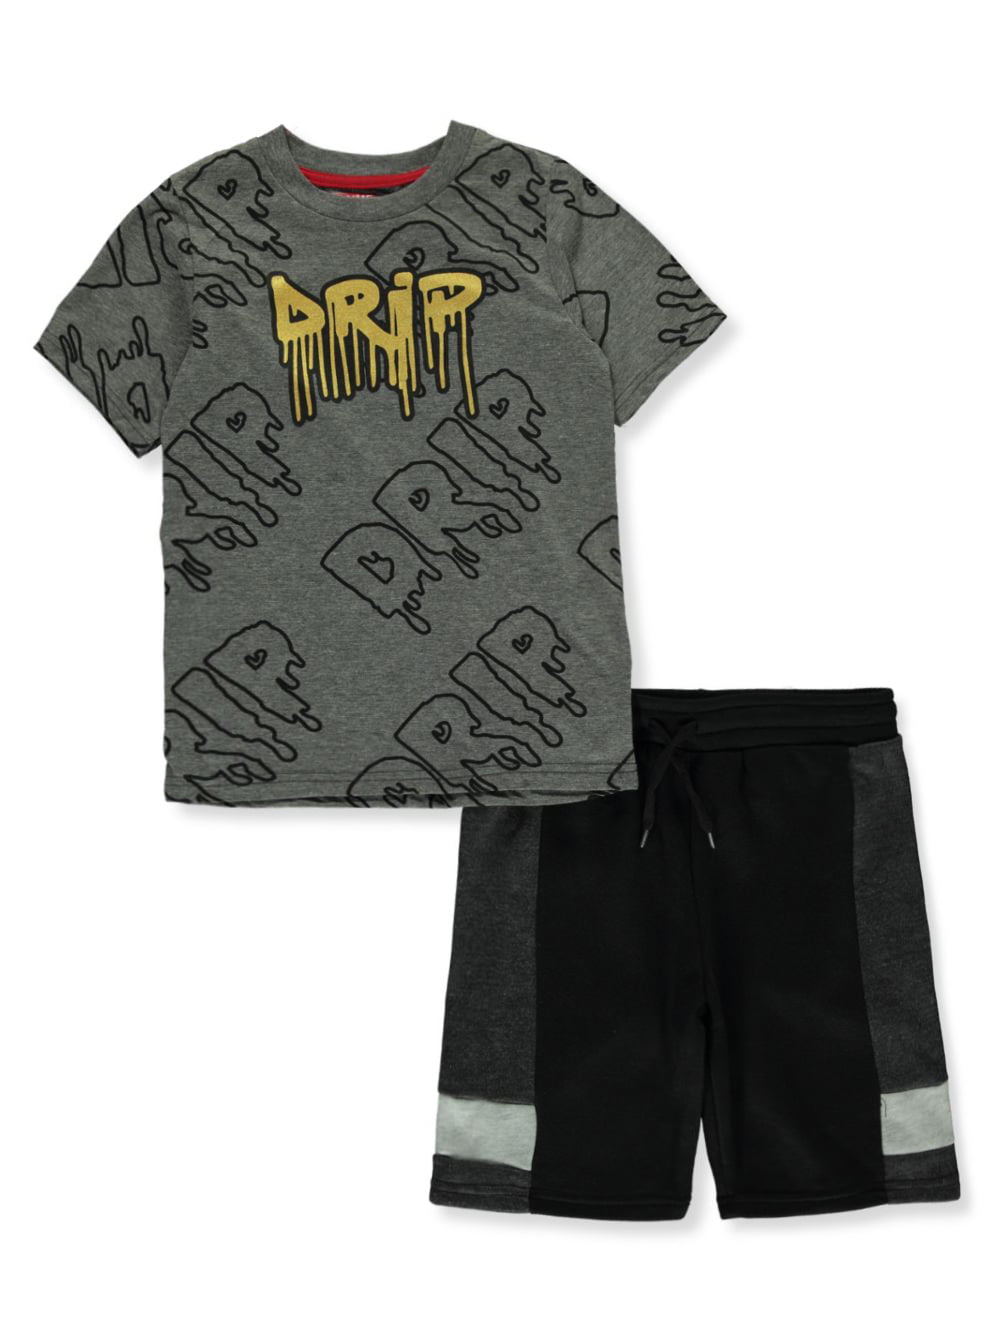 Prime Threads Boys' 2-Piece Drip Shorts Set Outfit - charcoal gray, 8 ...